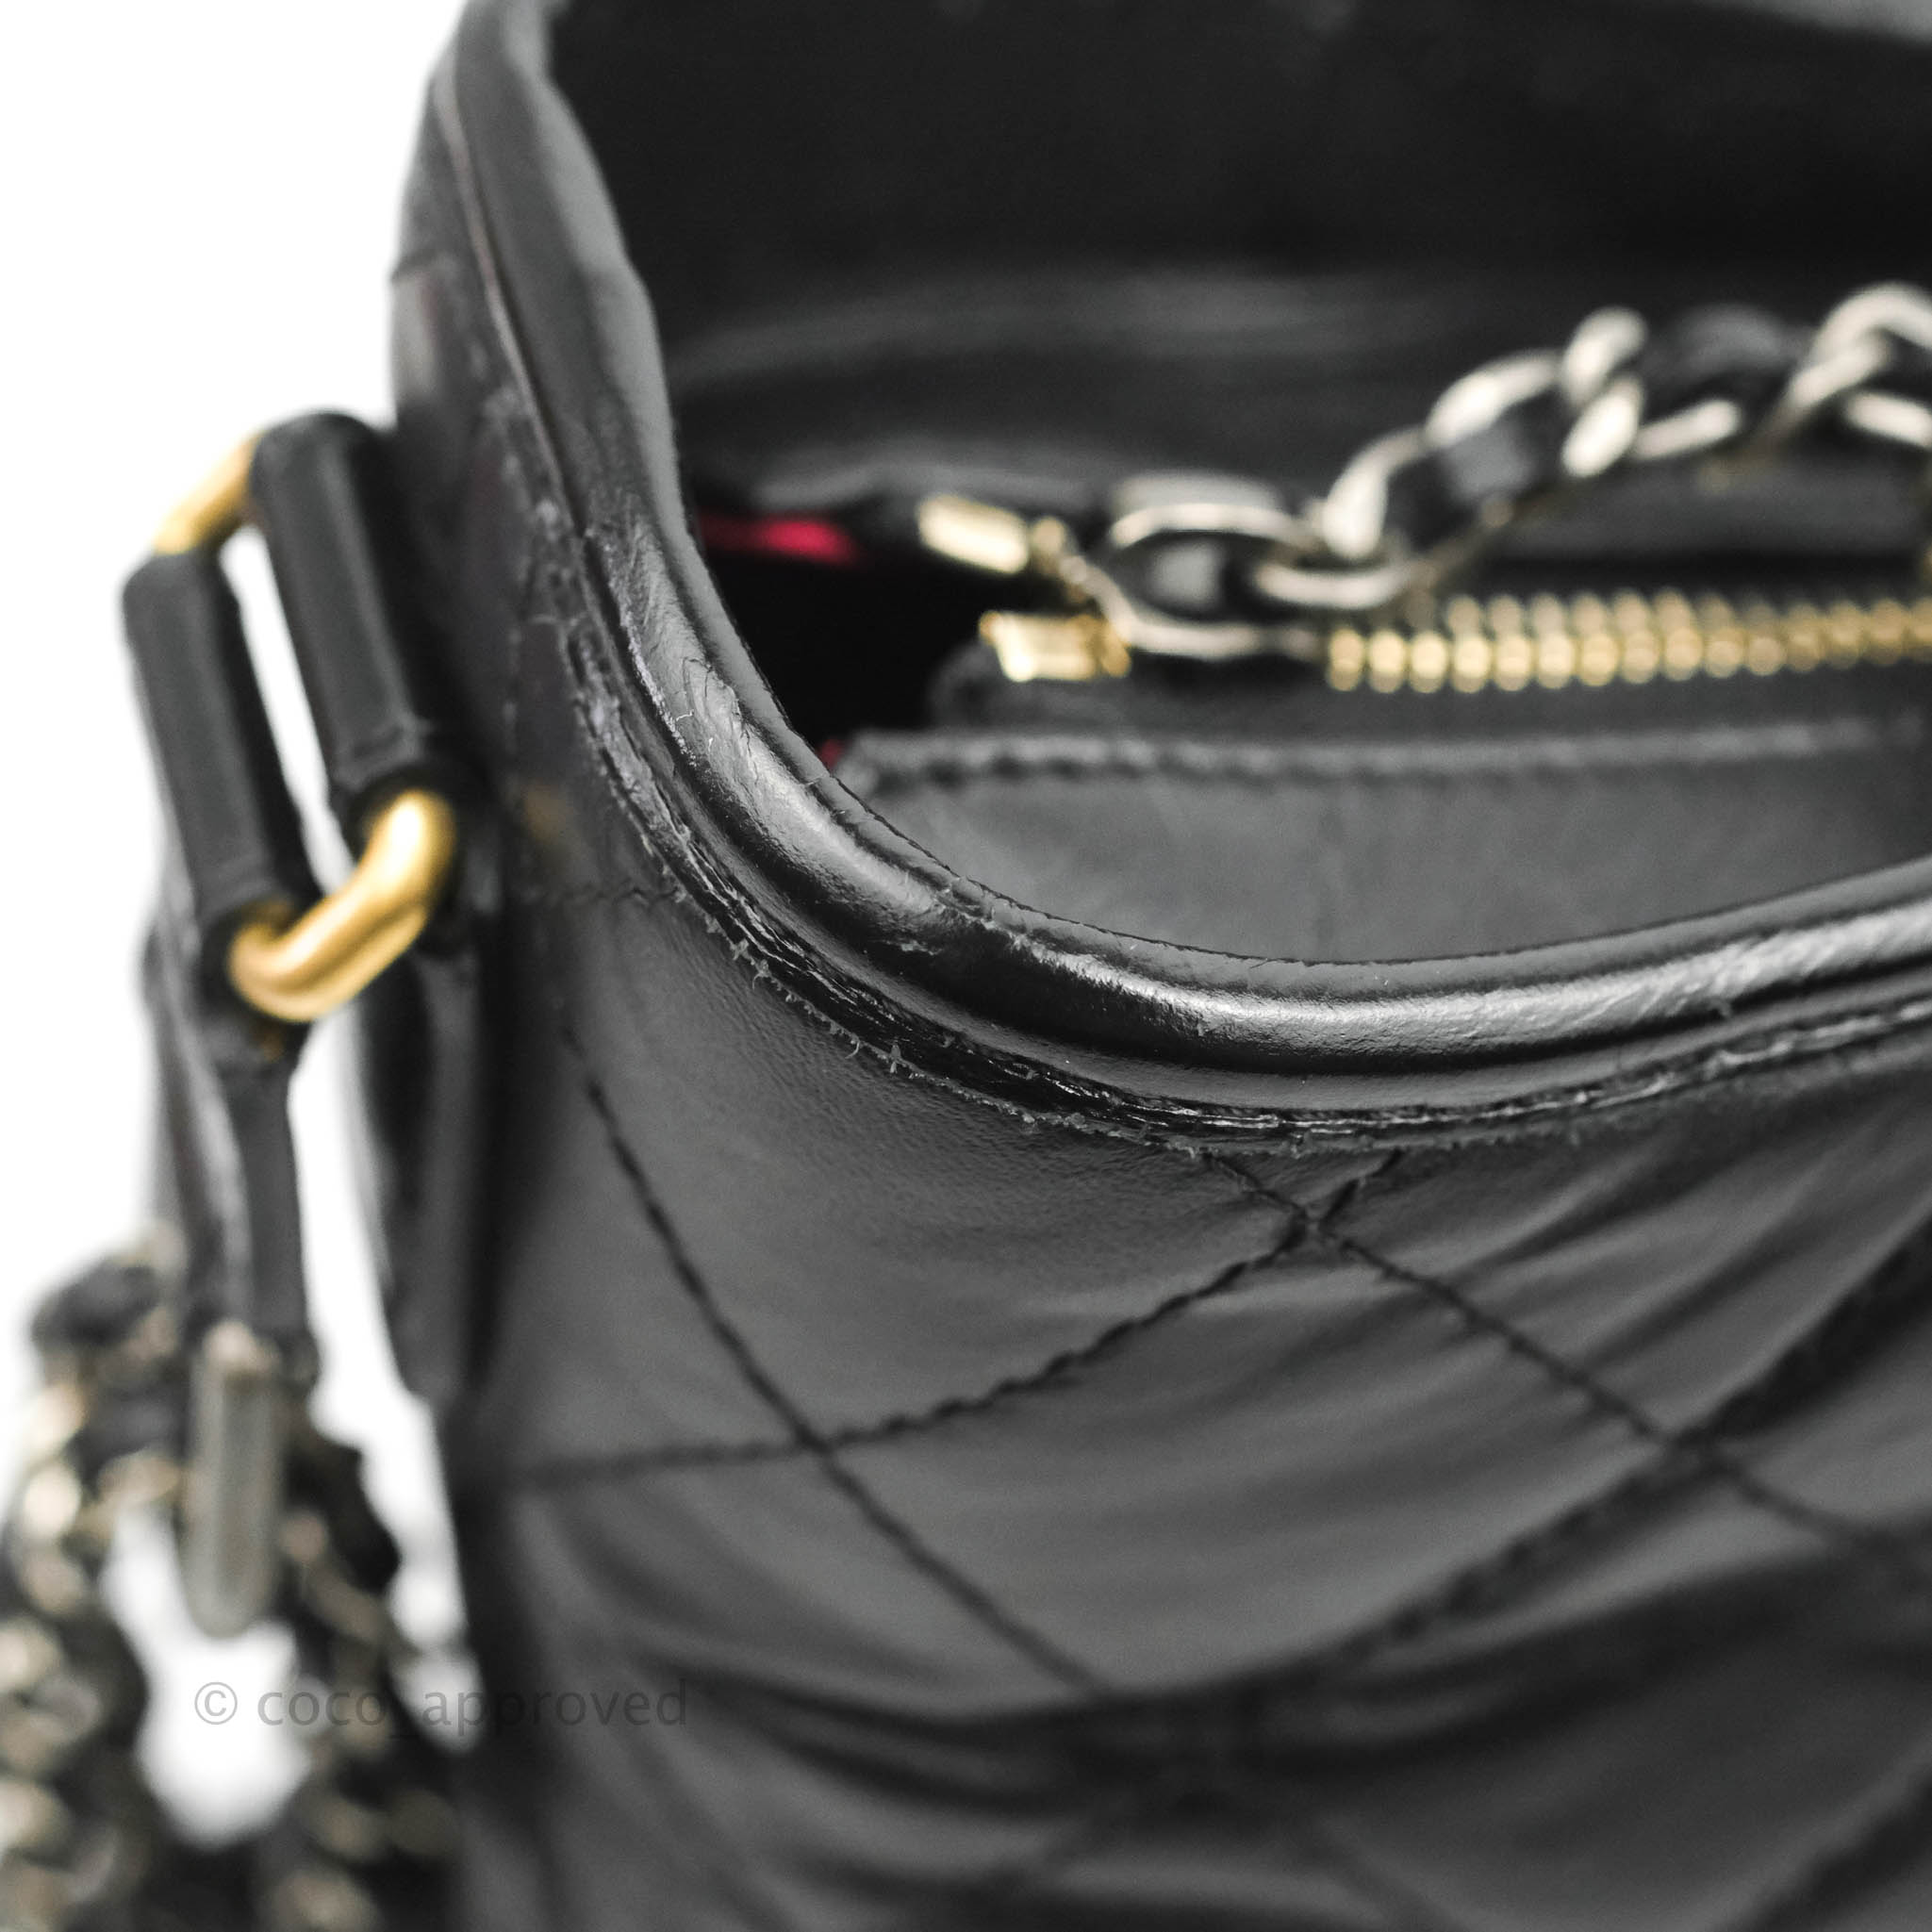 Chanel Large Gabrielle Hobo Black Aged Calfskin Mixed Hardware – Coco  Approved Studio